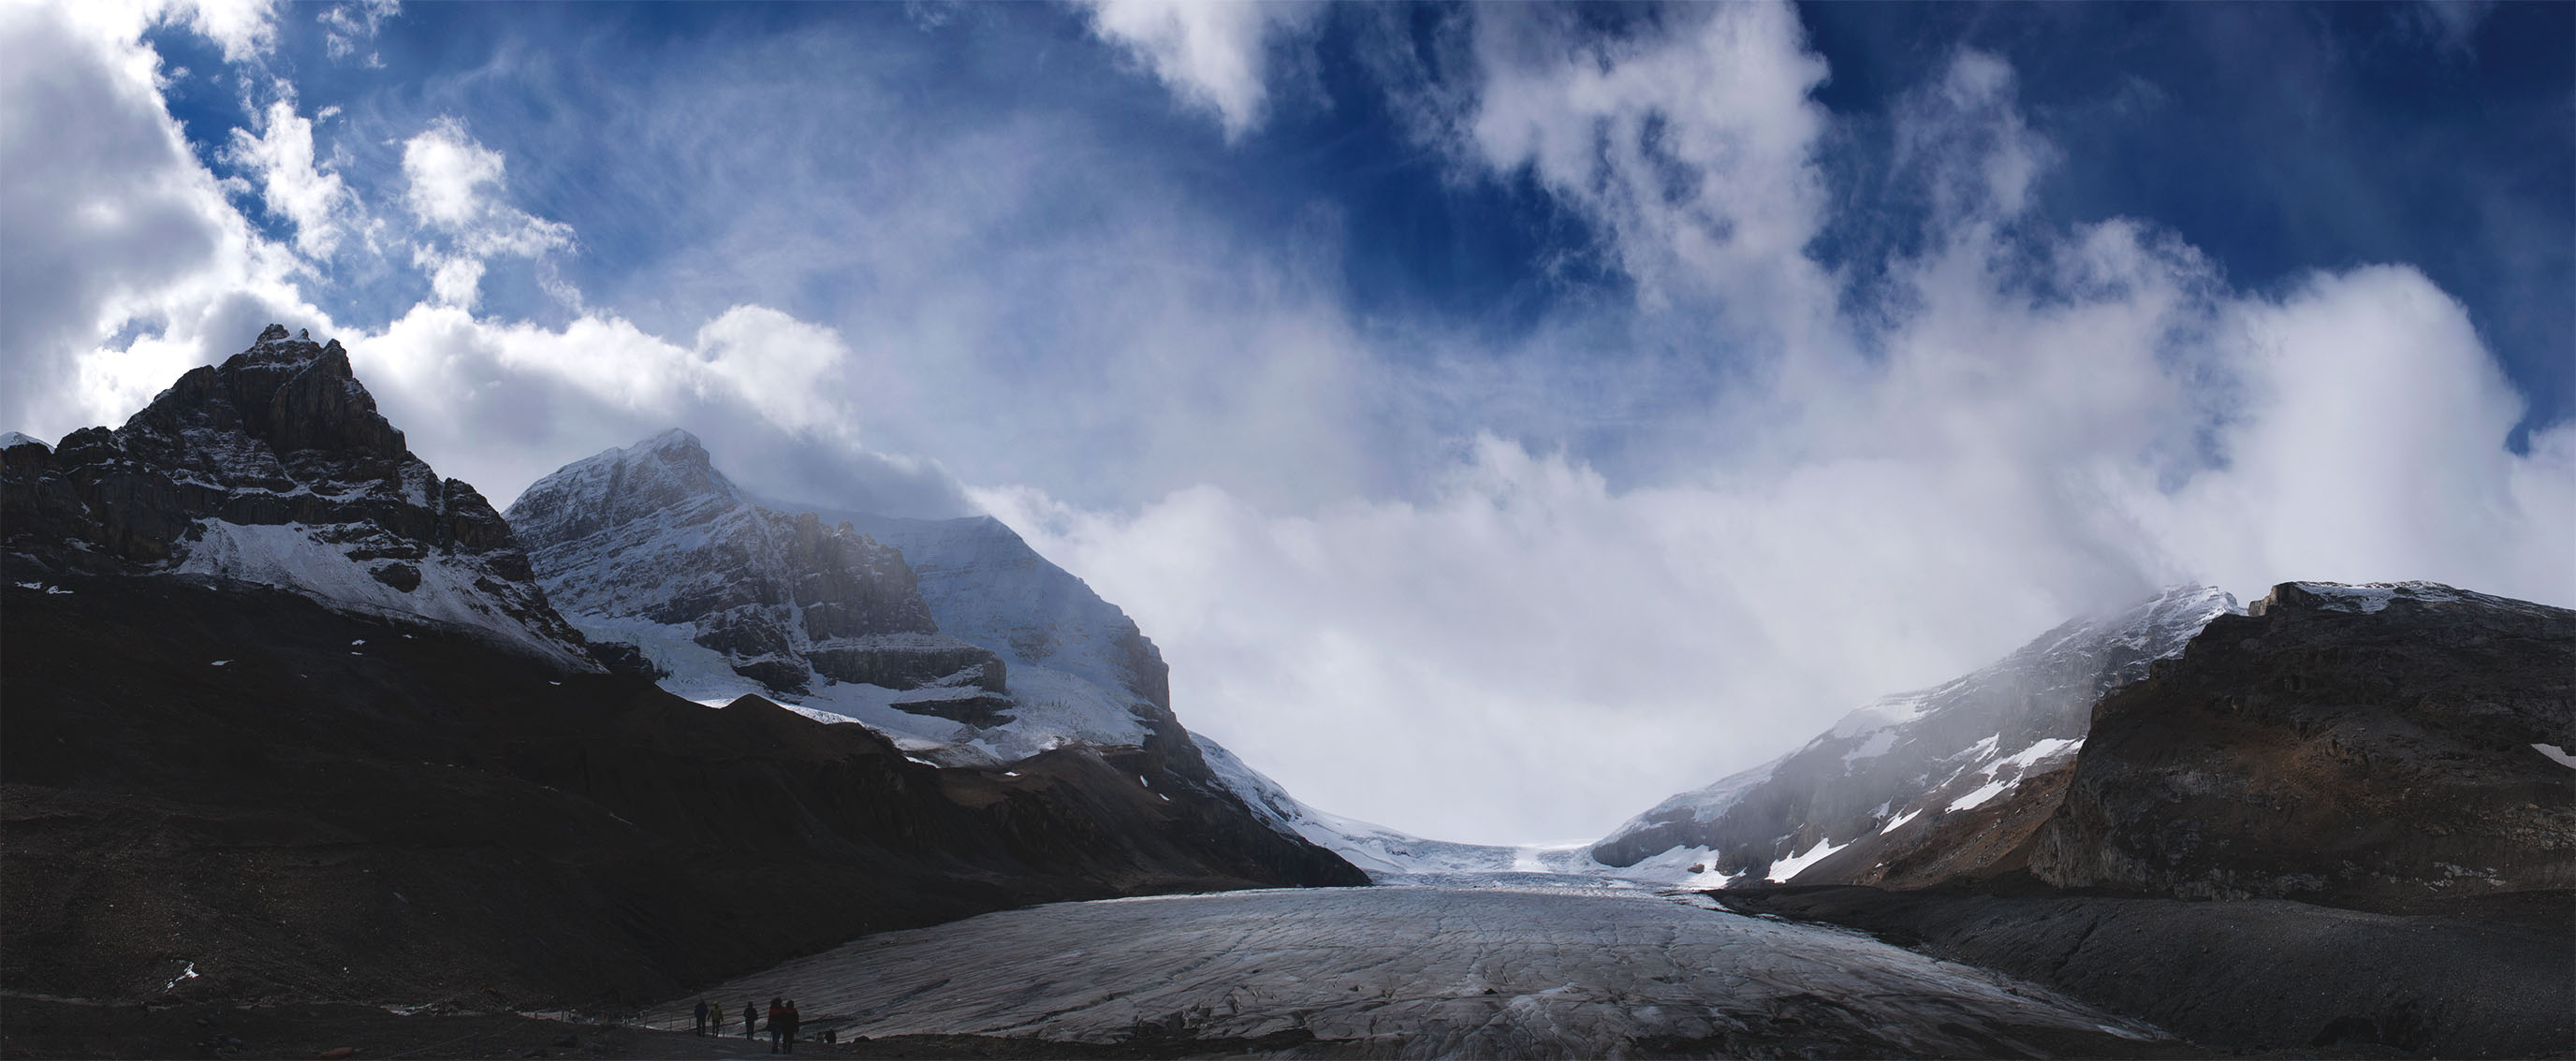 A panoramic photo of the Athabasca Glacier, two big mountains and in the middle the glacier. The walk to this glacier has markers showing how far down the glacier used to reach